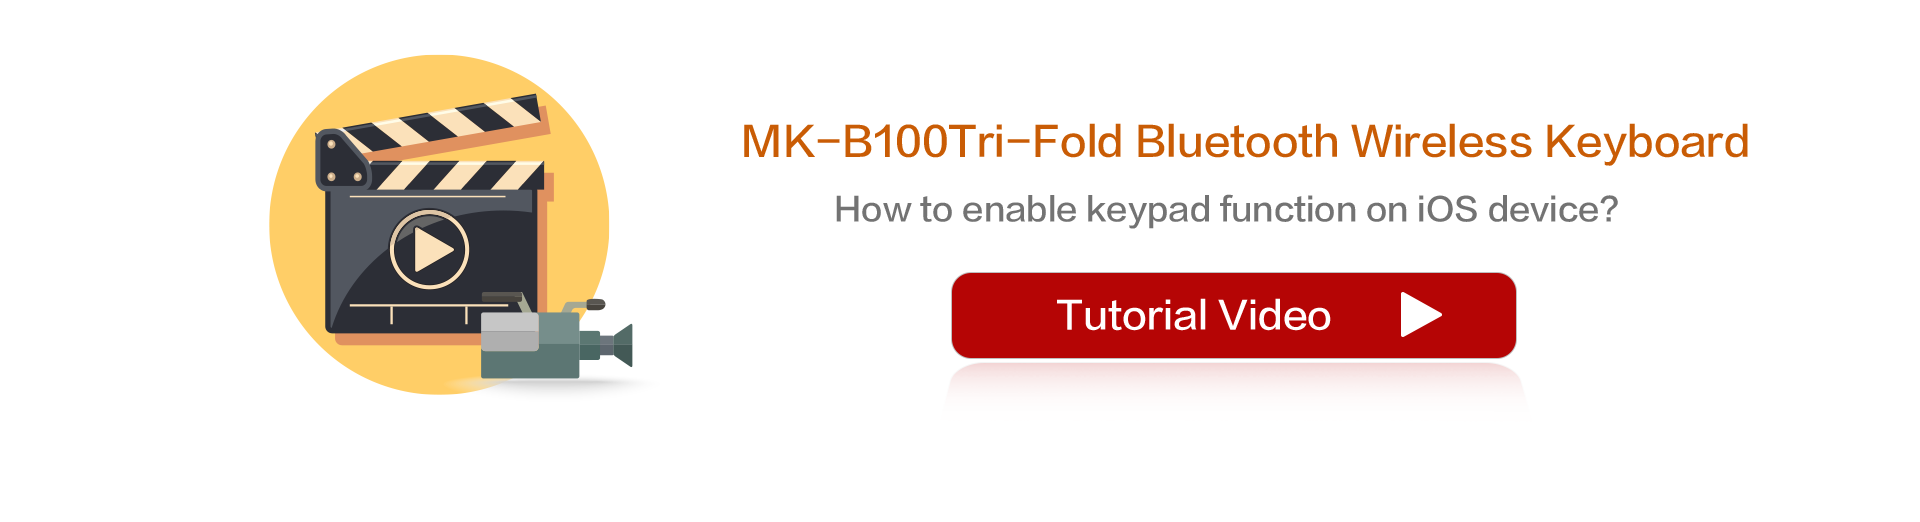  How to enable keypad function on iOS device?